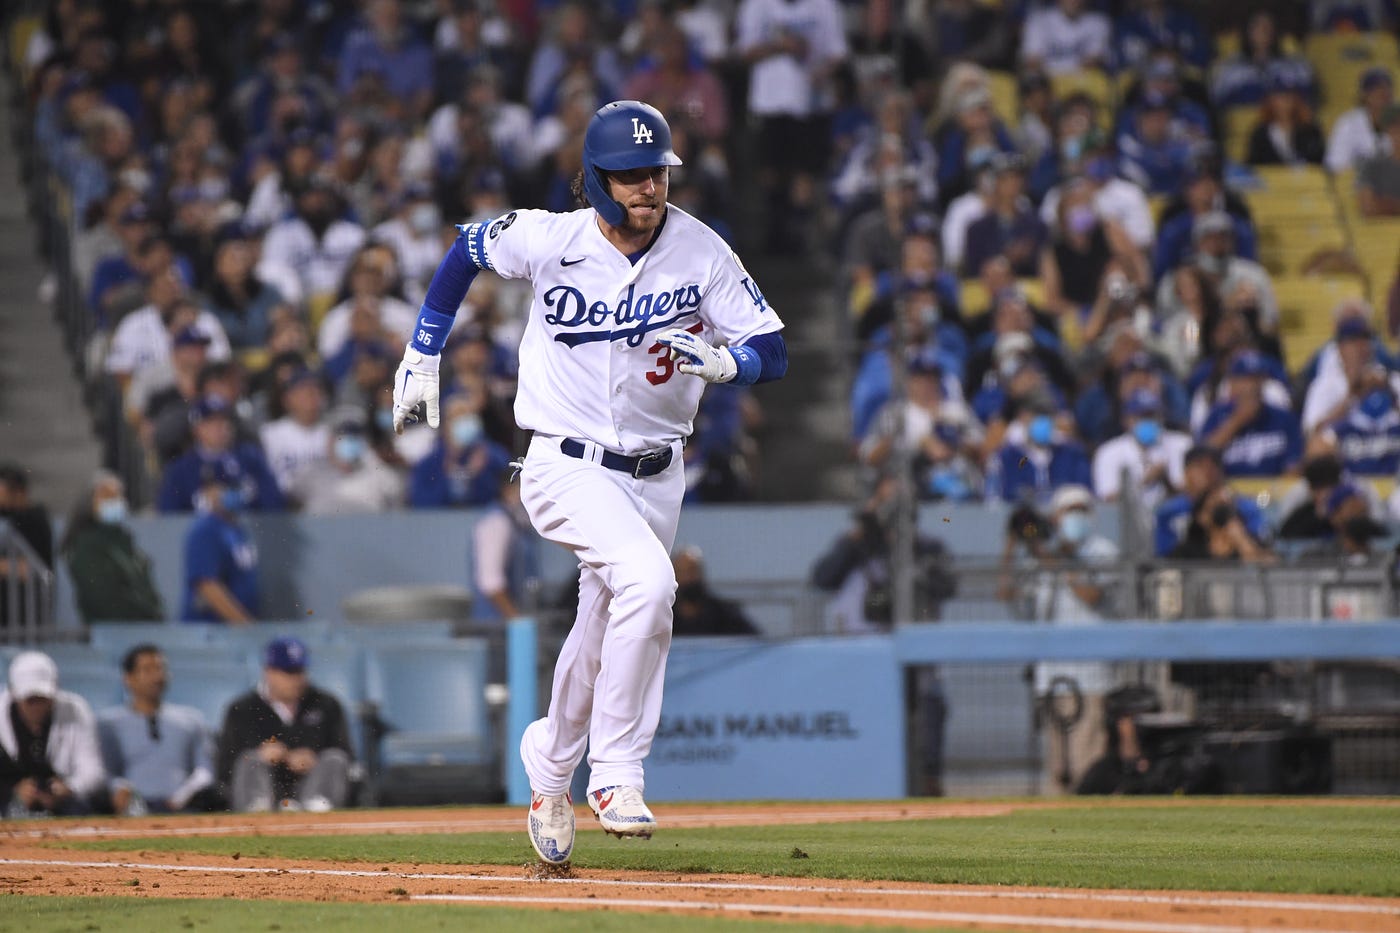 Los Angeles Dodgers: 2019 is The Year of Cody Bellinger